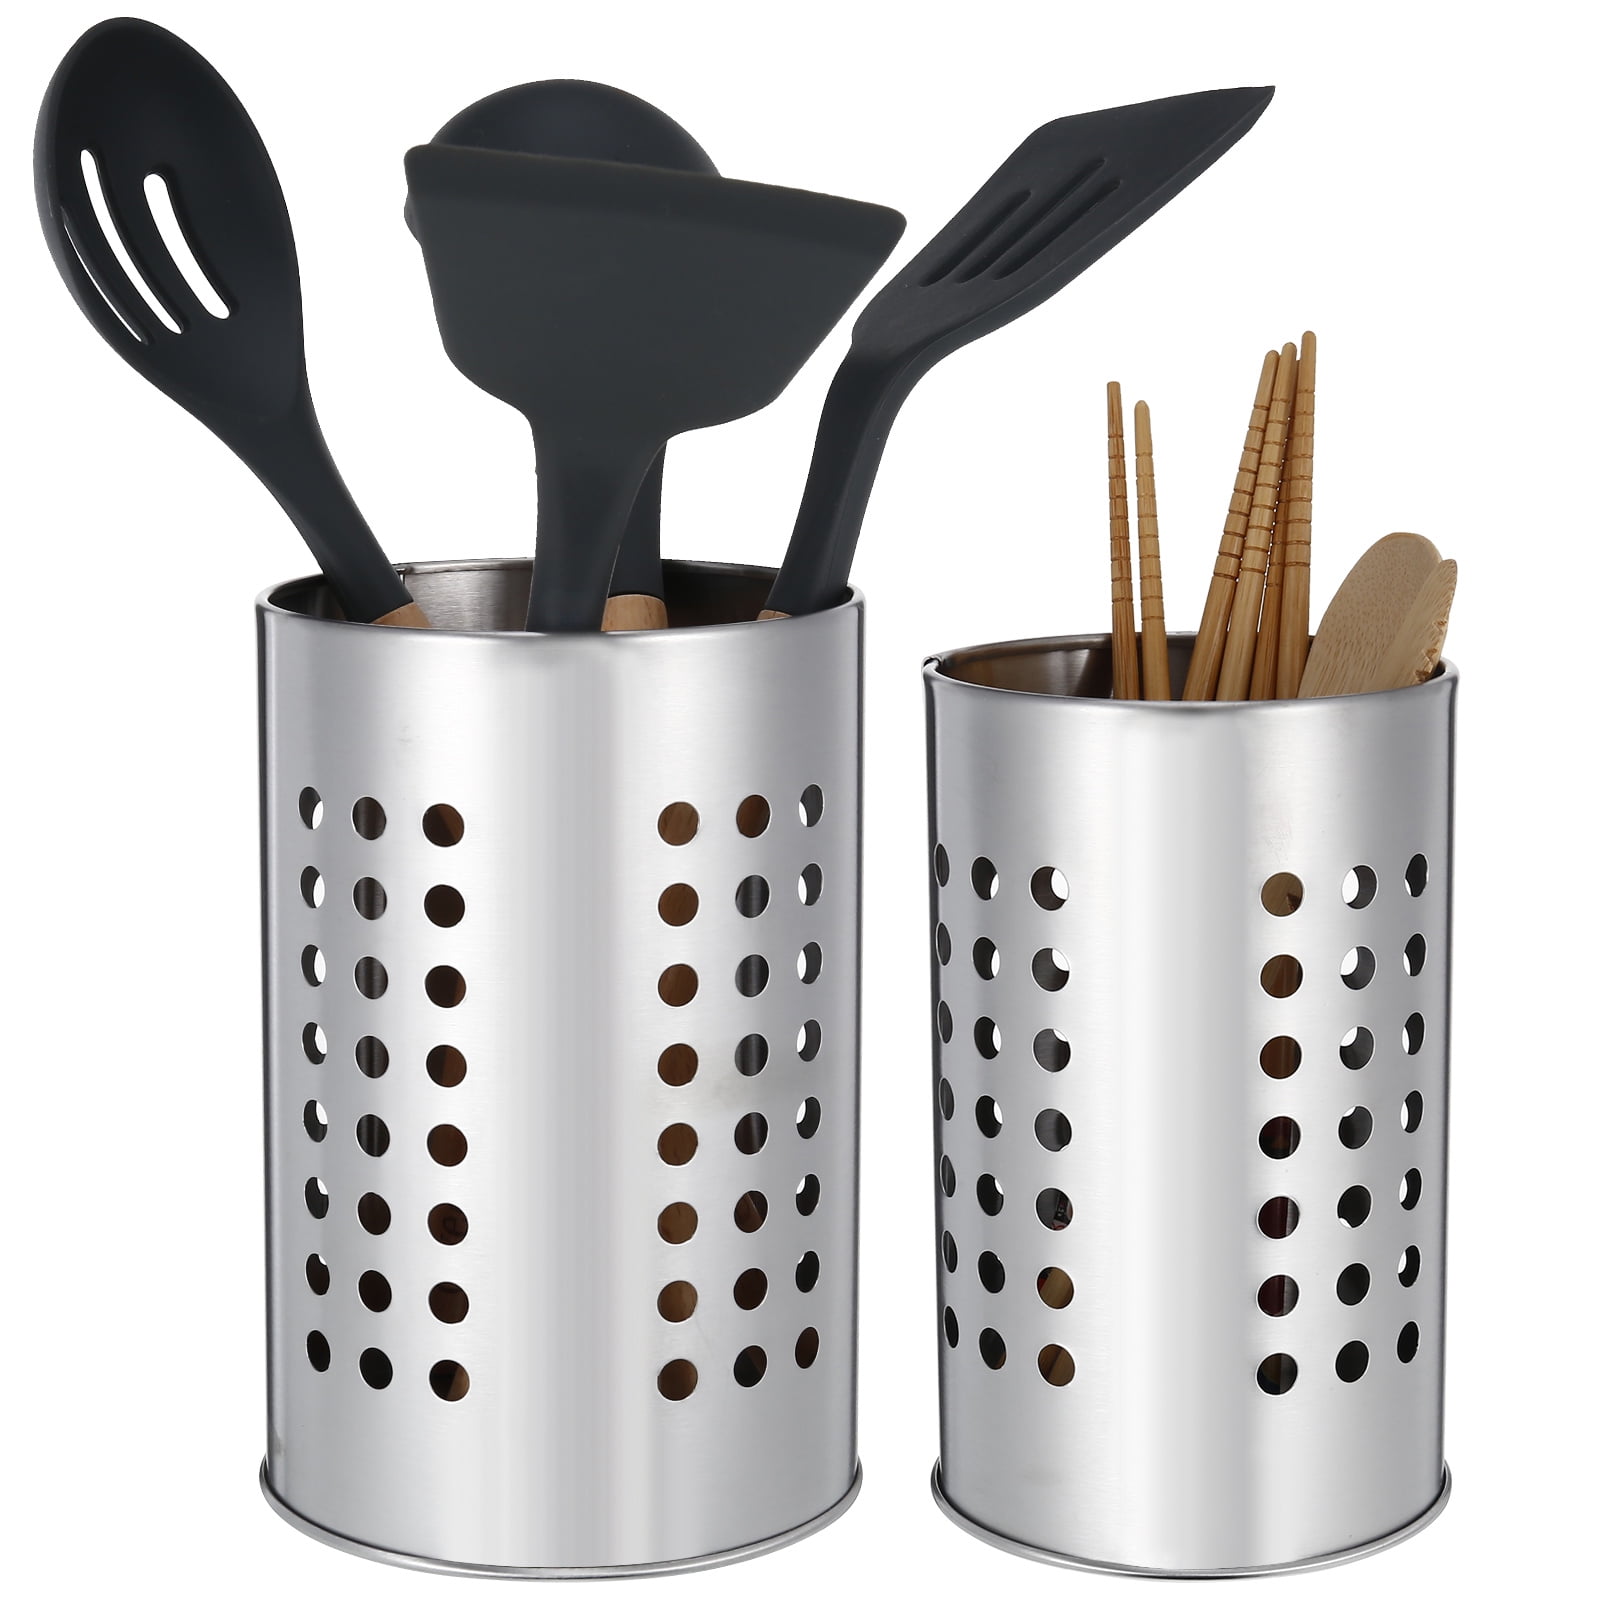 Leaqu Stainless Steel Cooking Utensil Holder, Extra-Large Stainless Steel Kitchen Utensil Holder, Utensil Caddy - Weighted Base for Stability - for